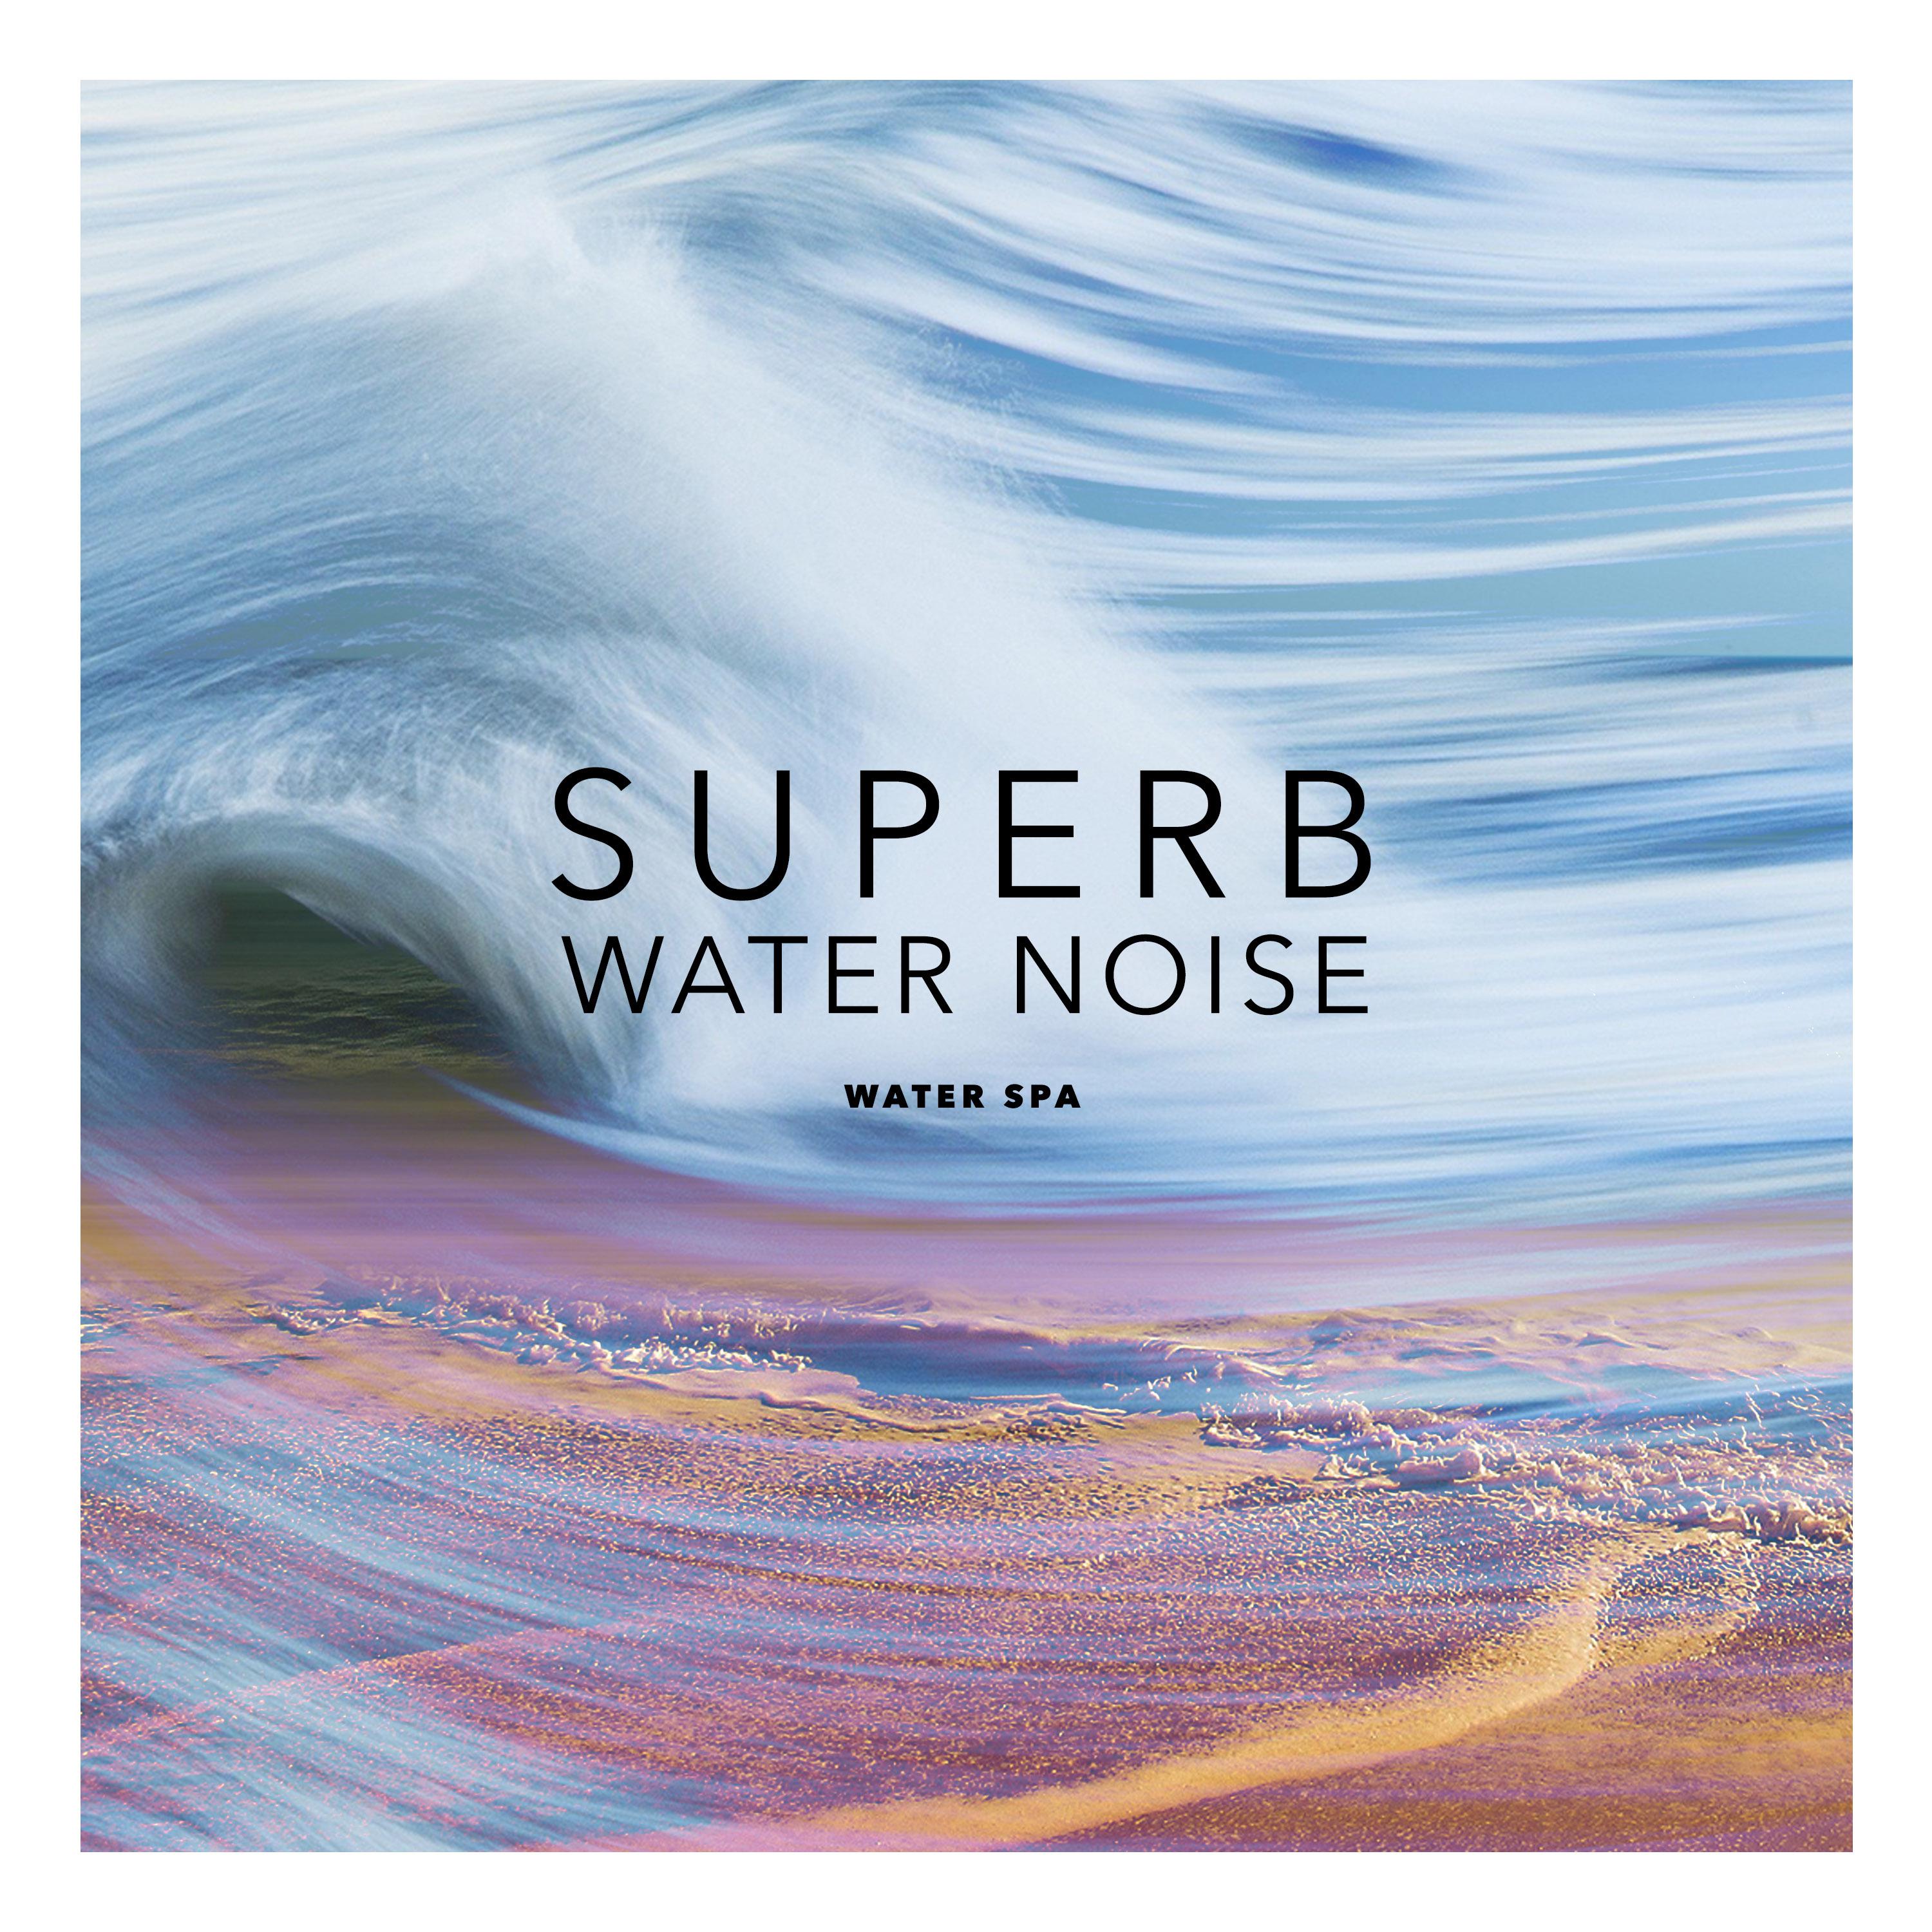 Superb Water Noise